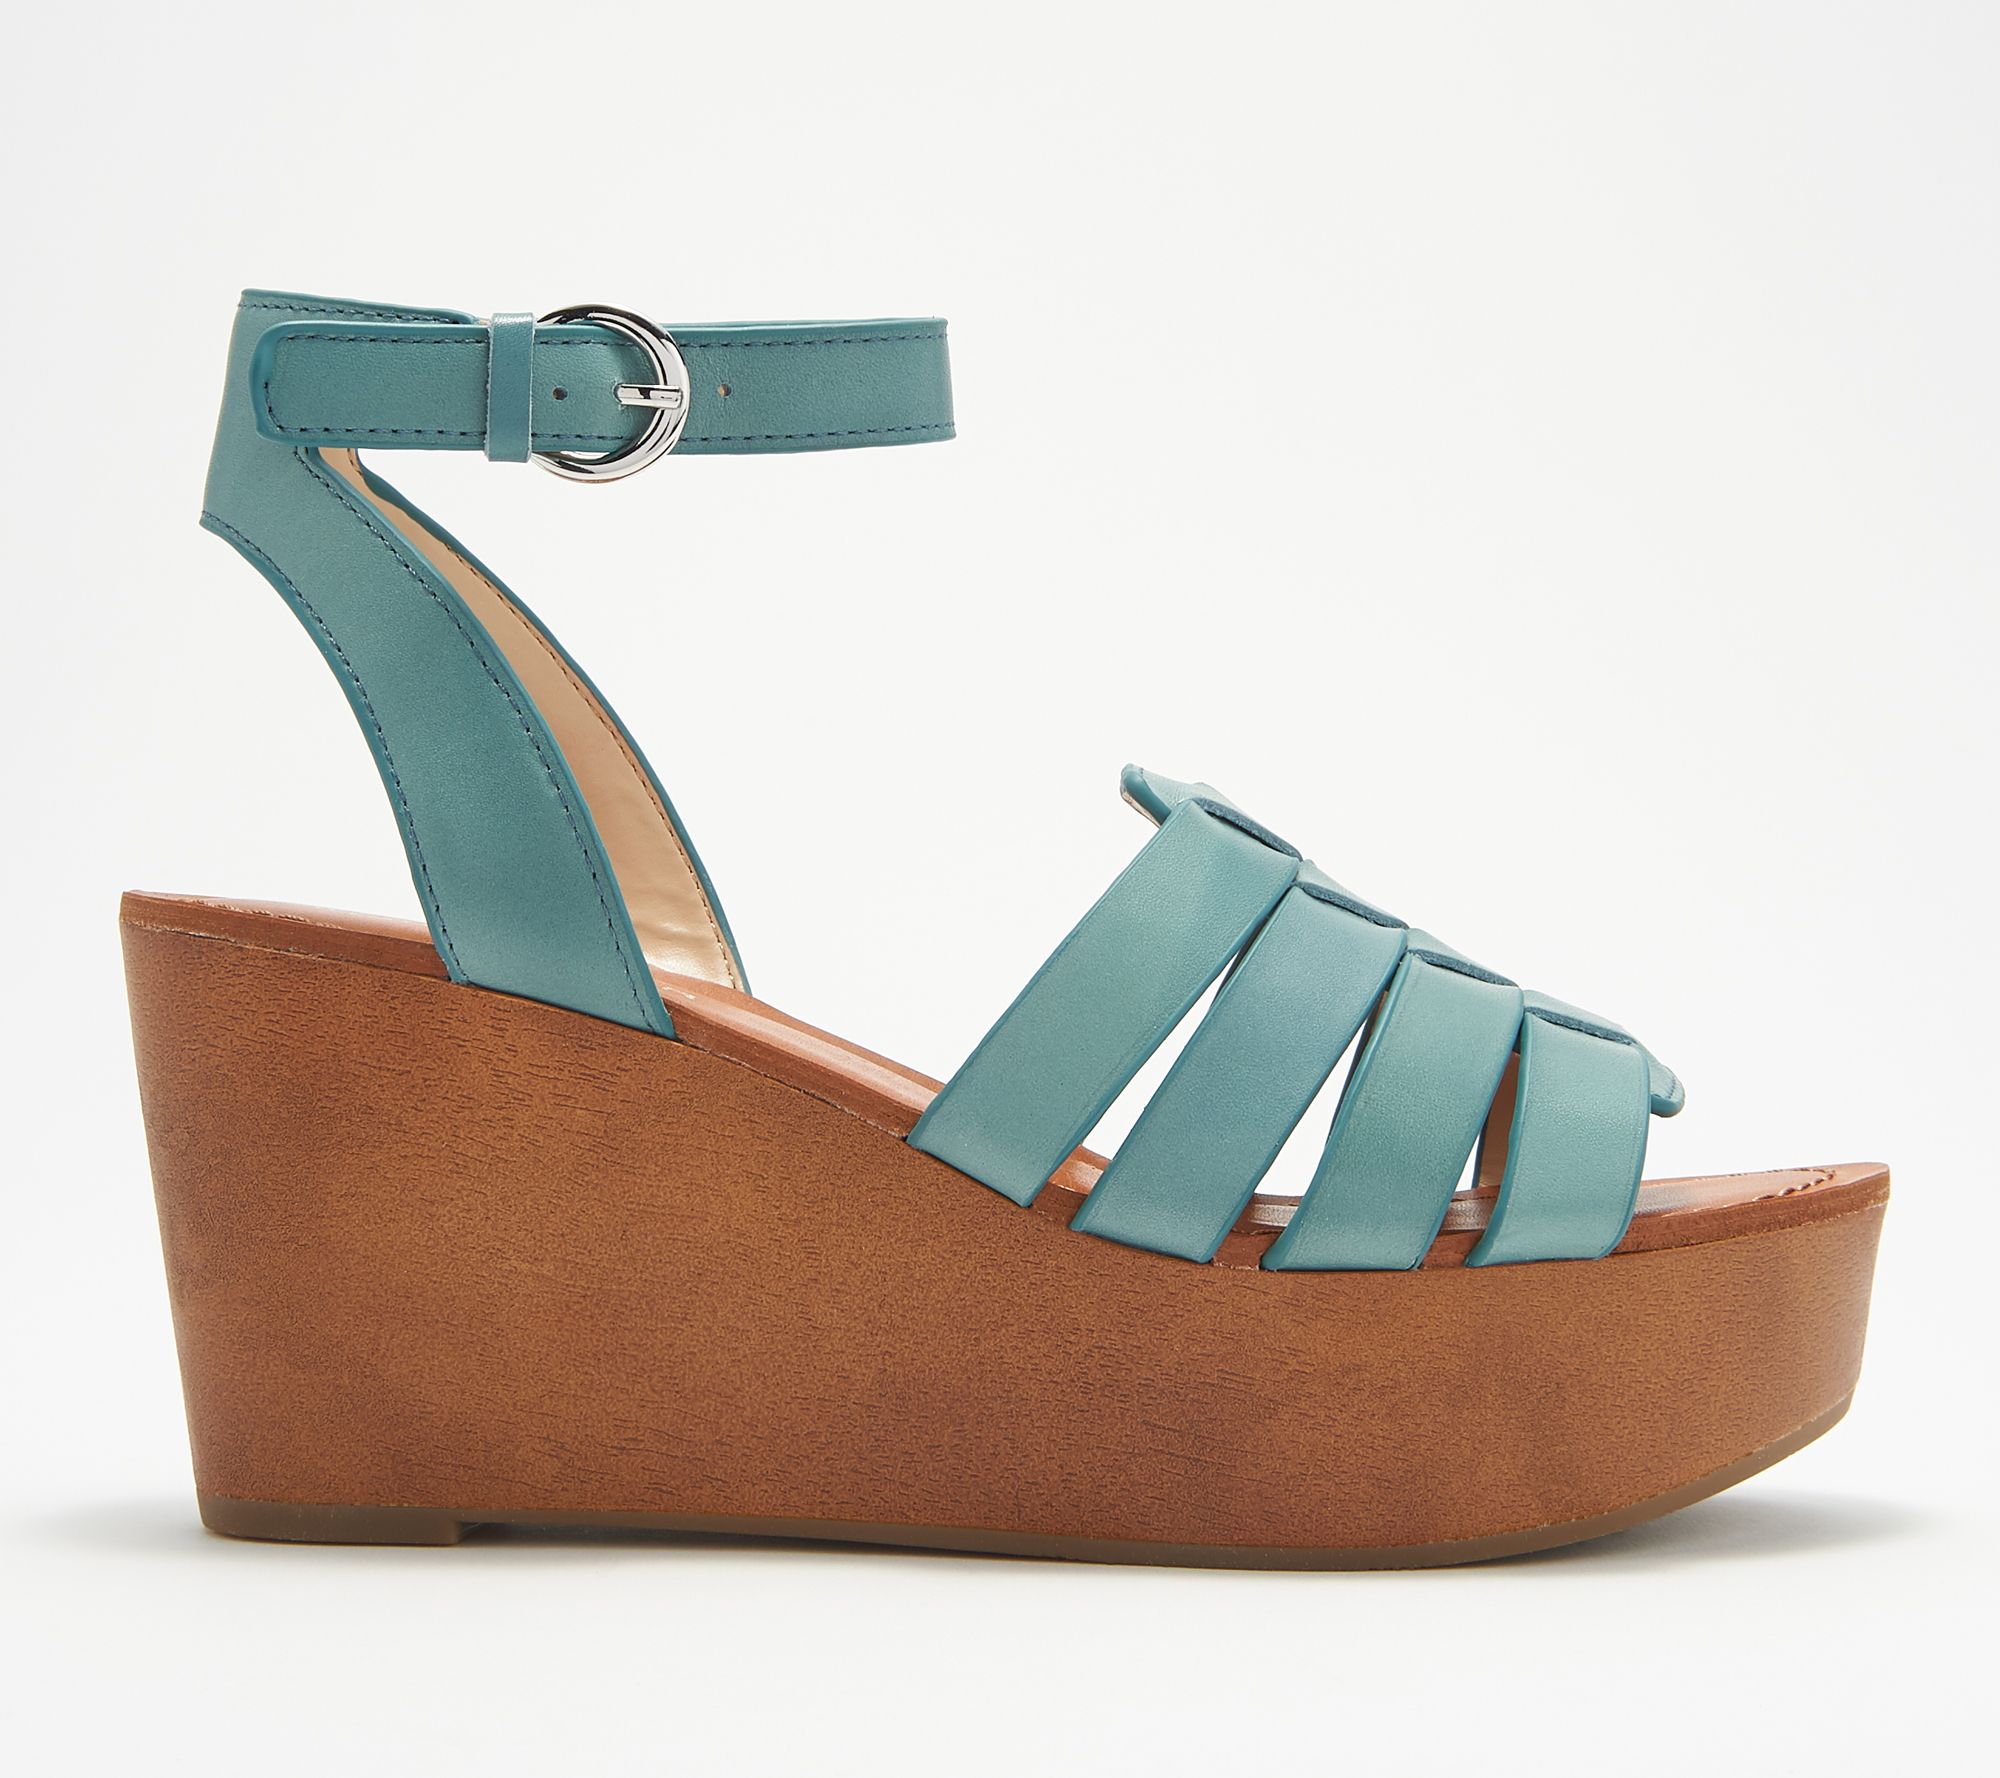 Marc Fisher Woven Leather Wedges with Ankle Strap - Pastya - QVC.com